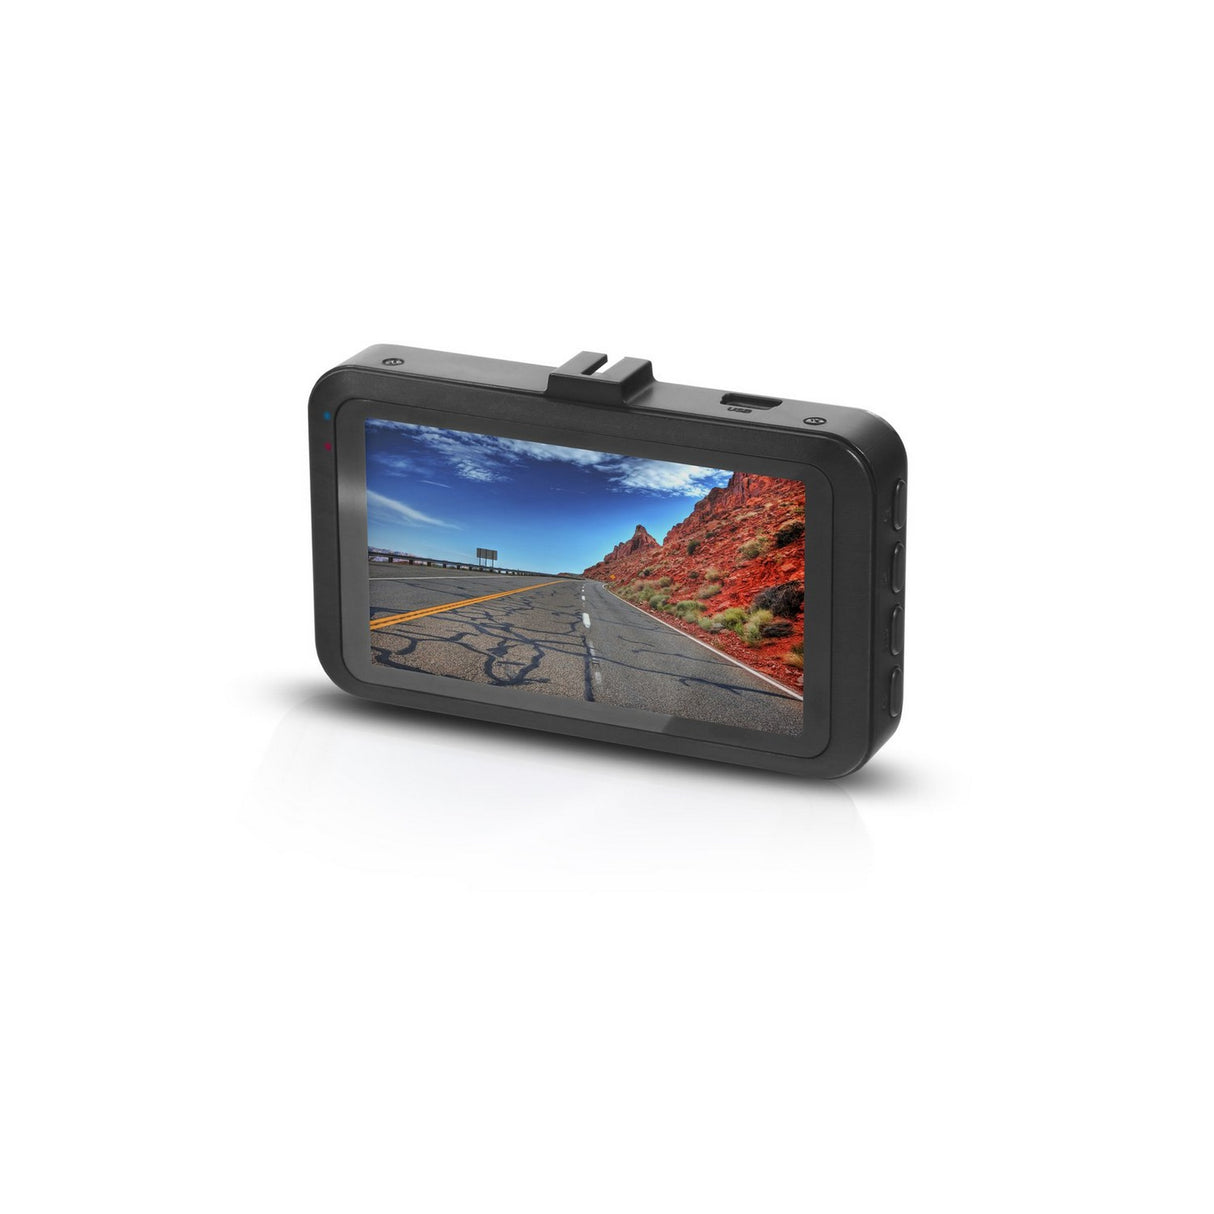 Minolta MNCD330 1080p Car Camcorder with 3.0-Inch LCD Monitor, Black